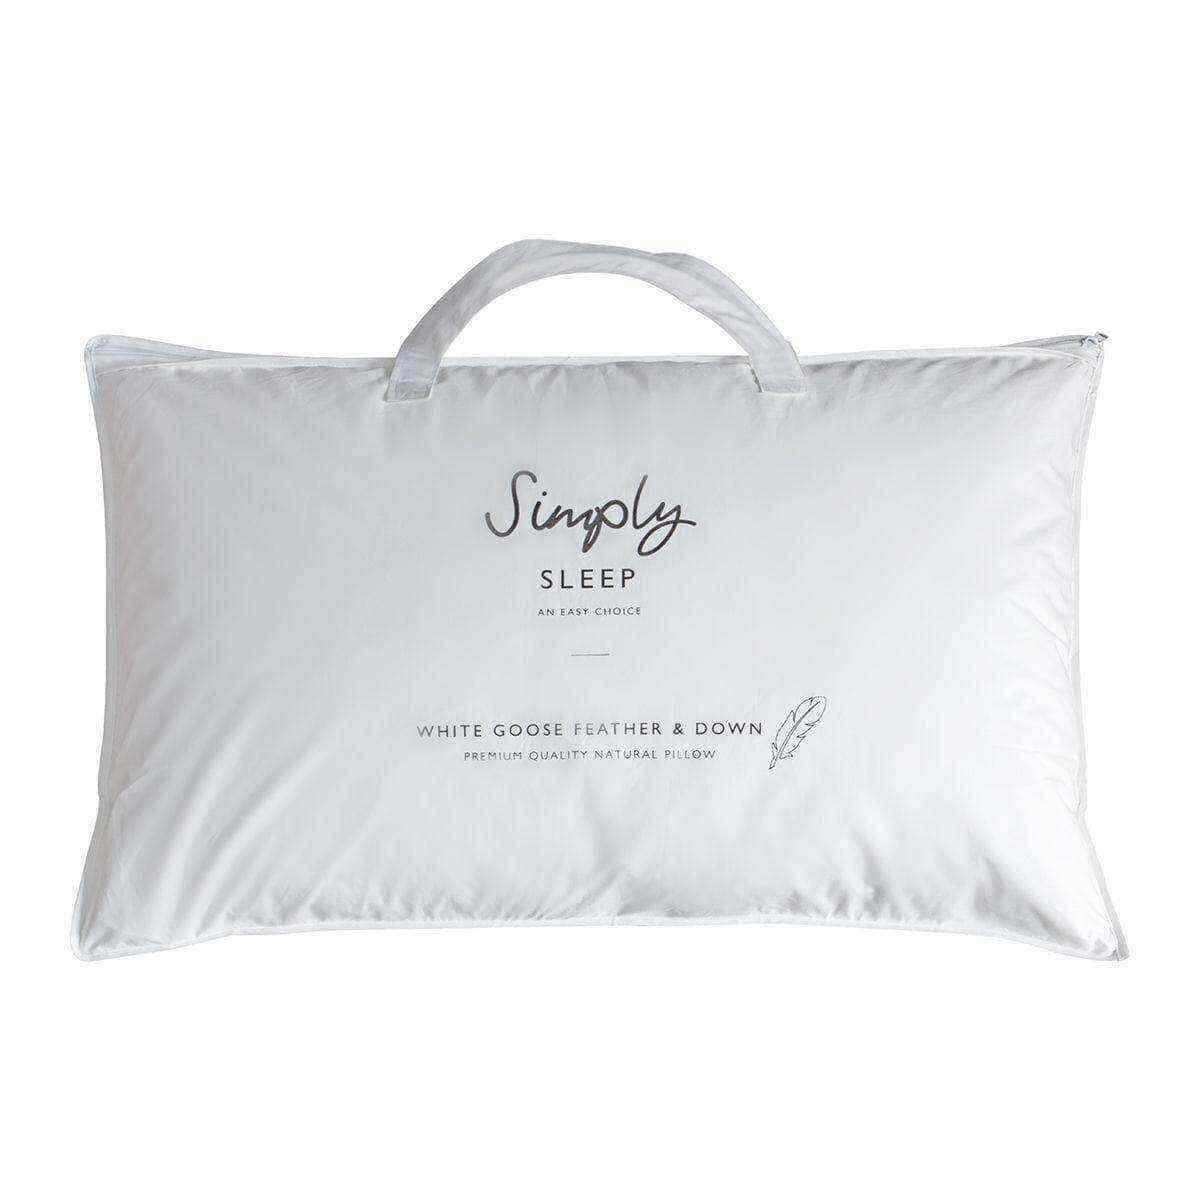 Perfect Sleep - 2 Pack White Goose Feather & Down Pillow Set - The Farthing